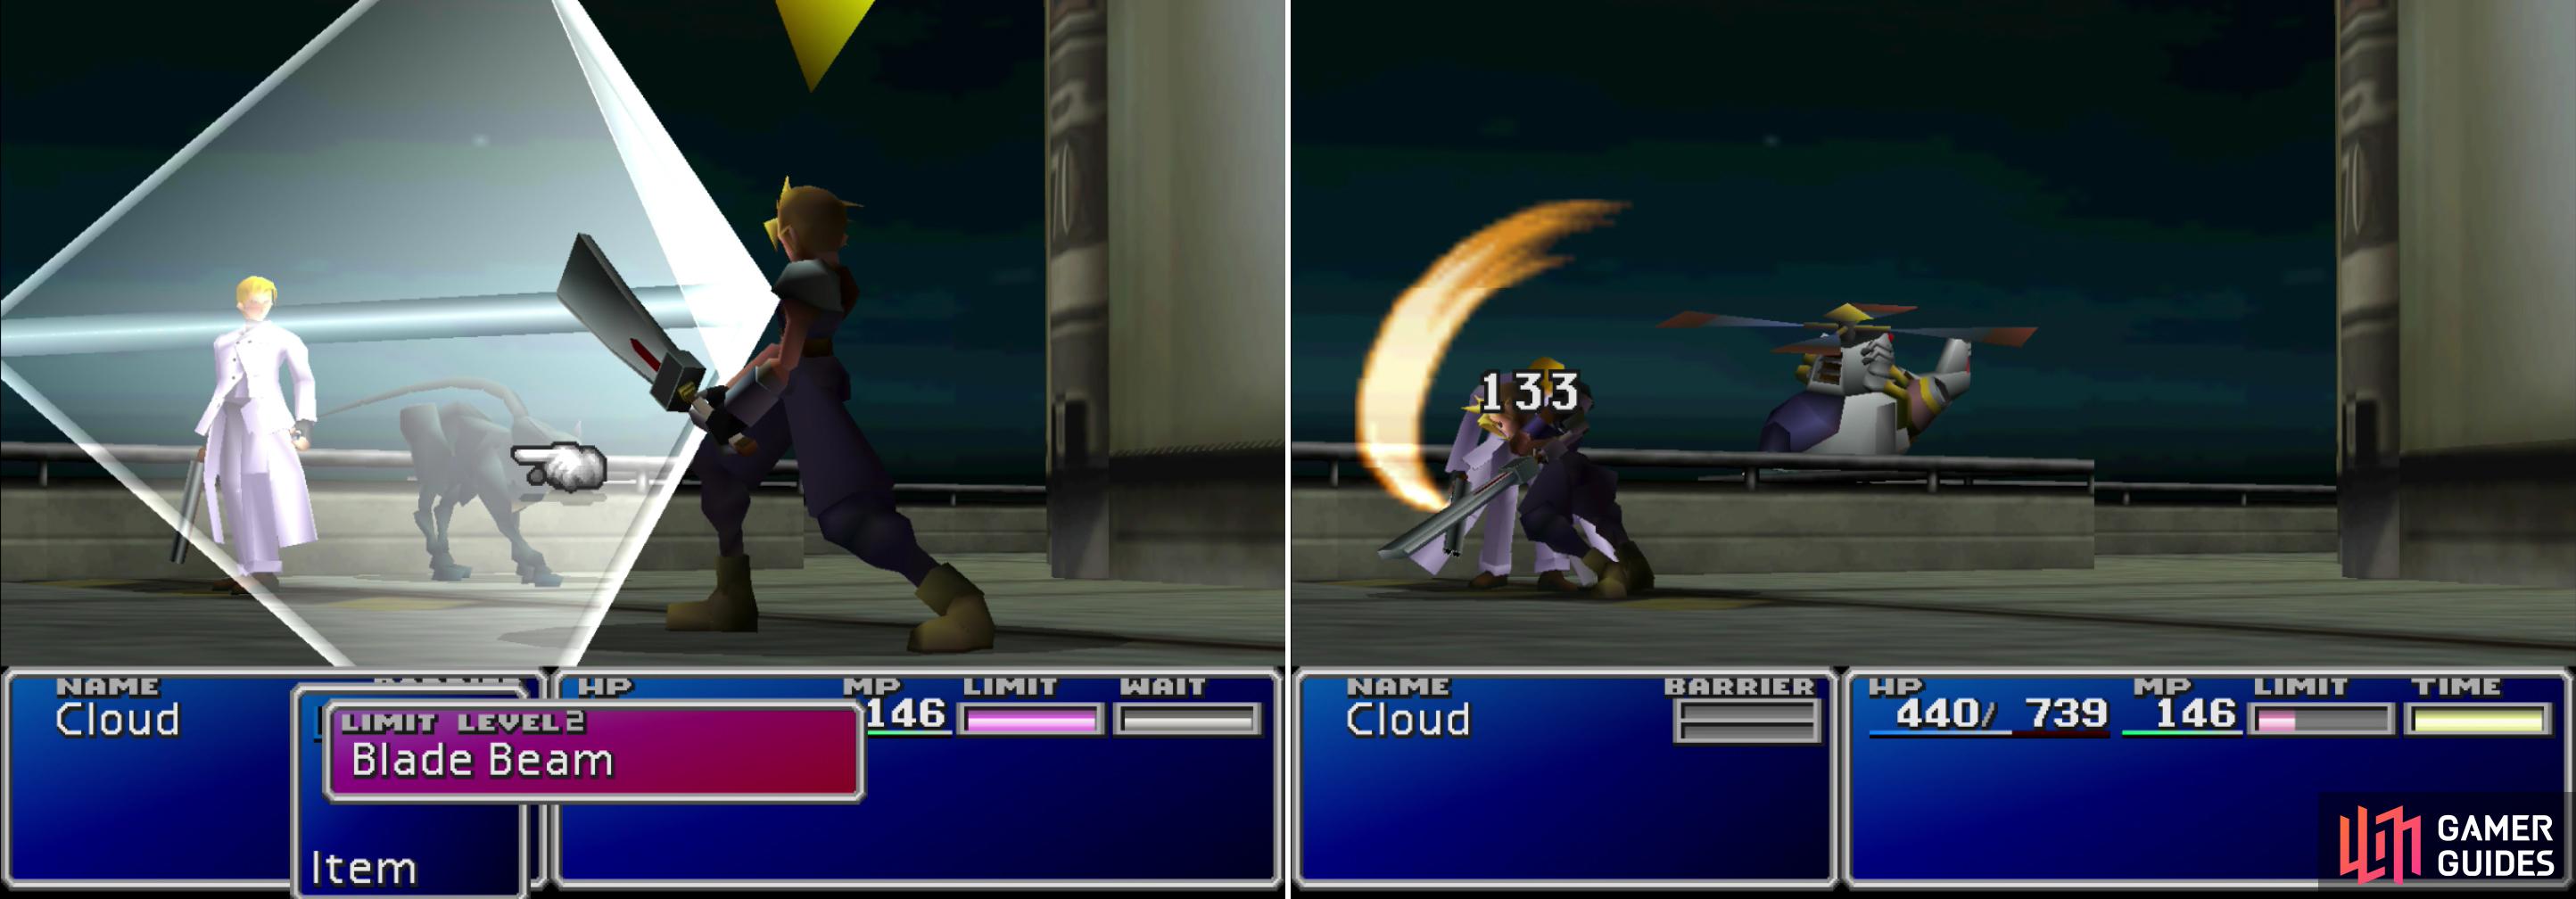 Rufus’s pet Dark Nation will start out the fight by protecting its master (left). In the long run, however, Rufus can’t trade blows for Cloud in a one-on-one engagement (right).